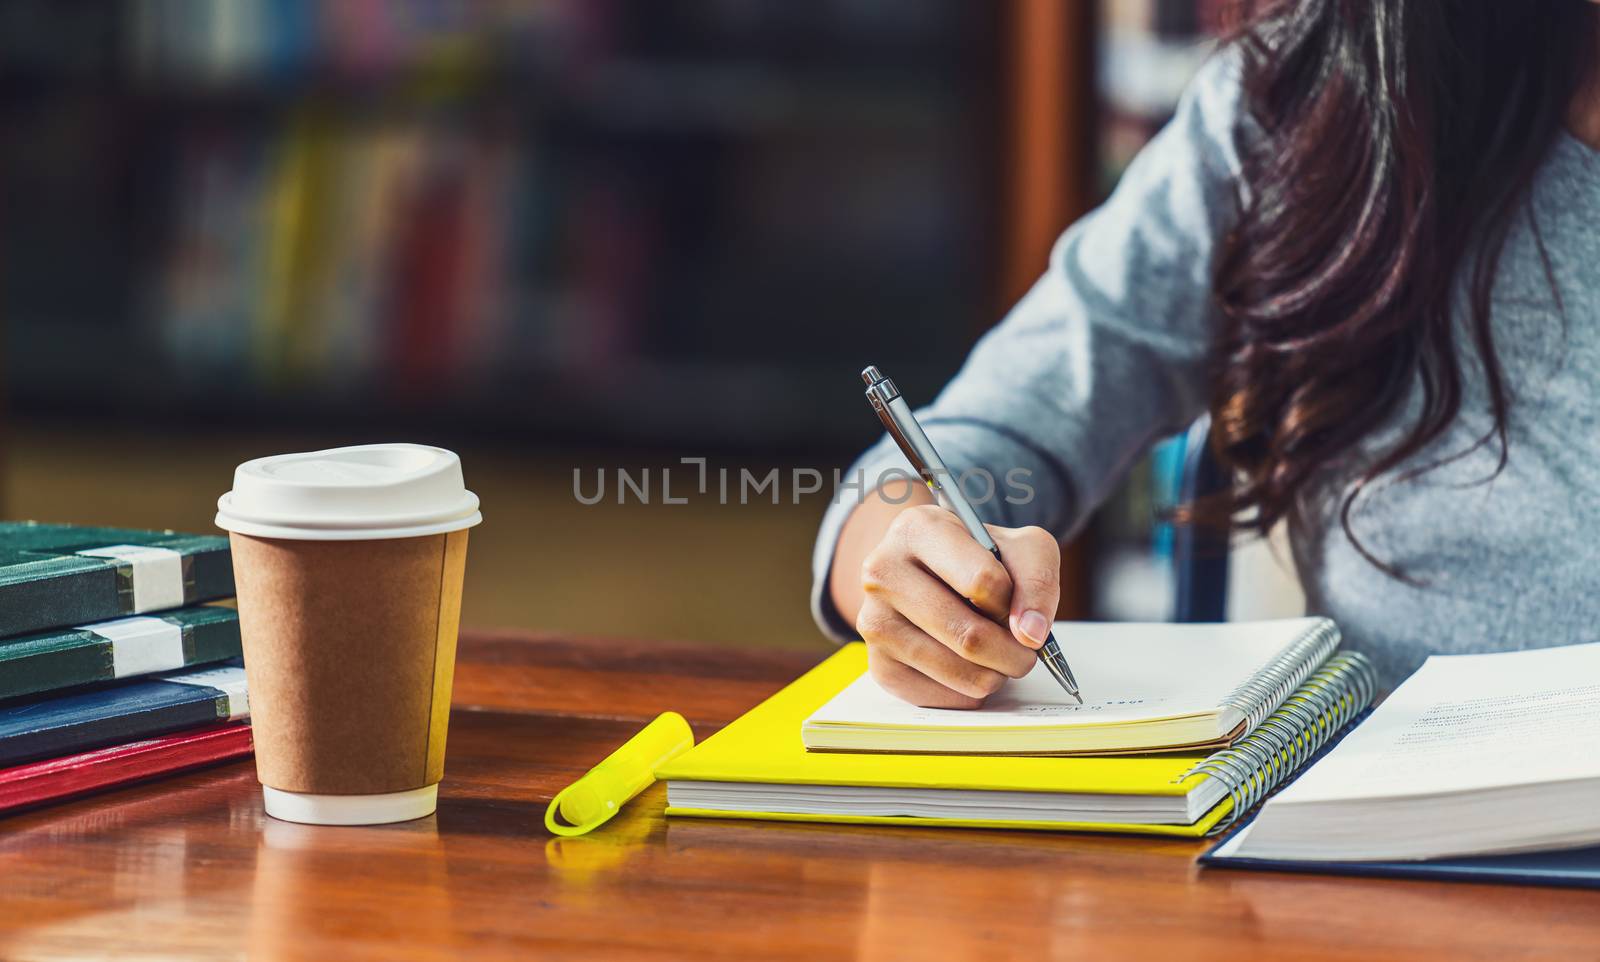 Closeup Asian young Student hand writing homework in library of university or colleague with various book and stationary with coffee cup on wooden table over the book shelf background,Back to school